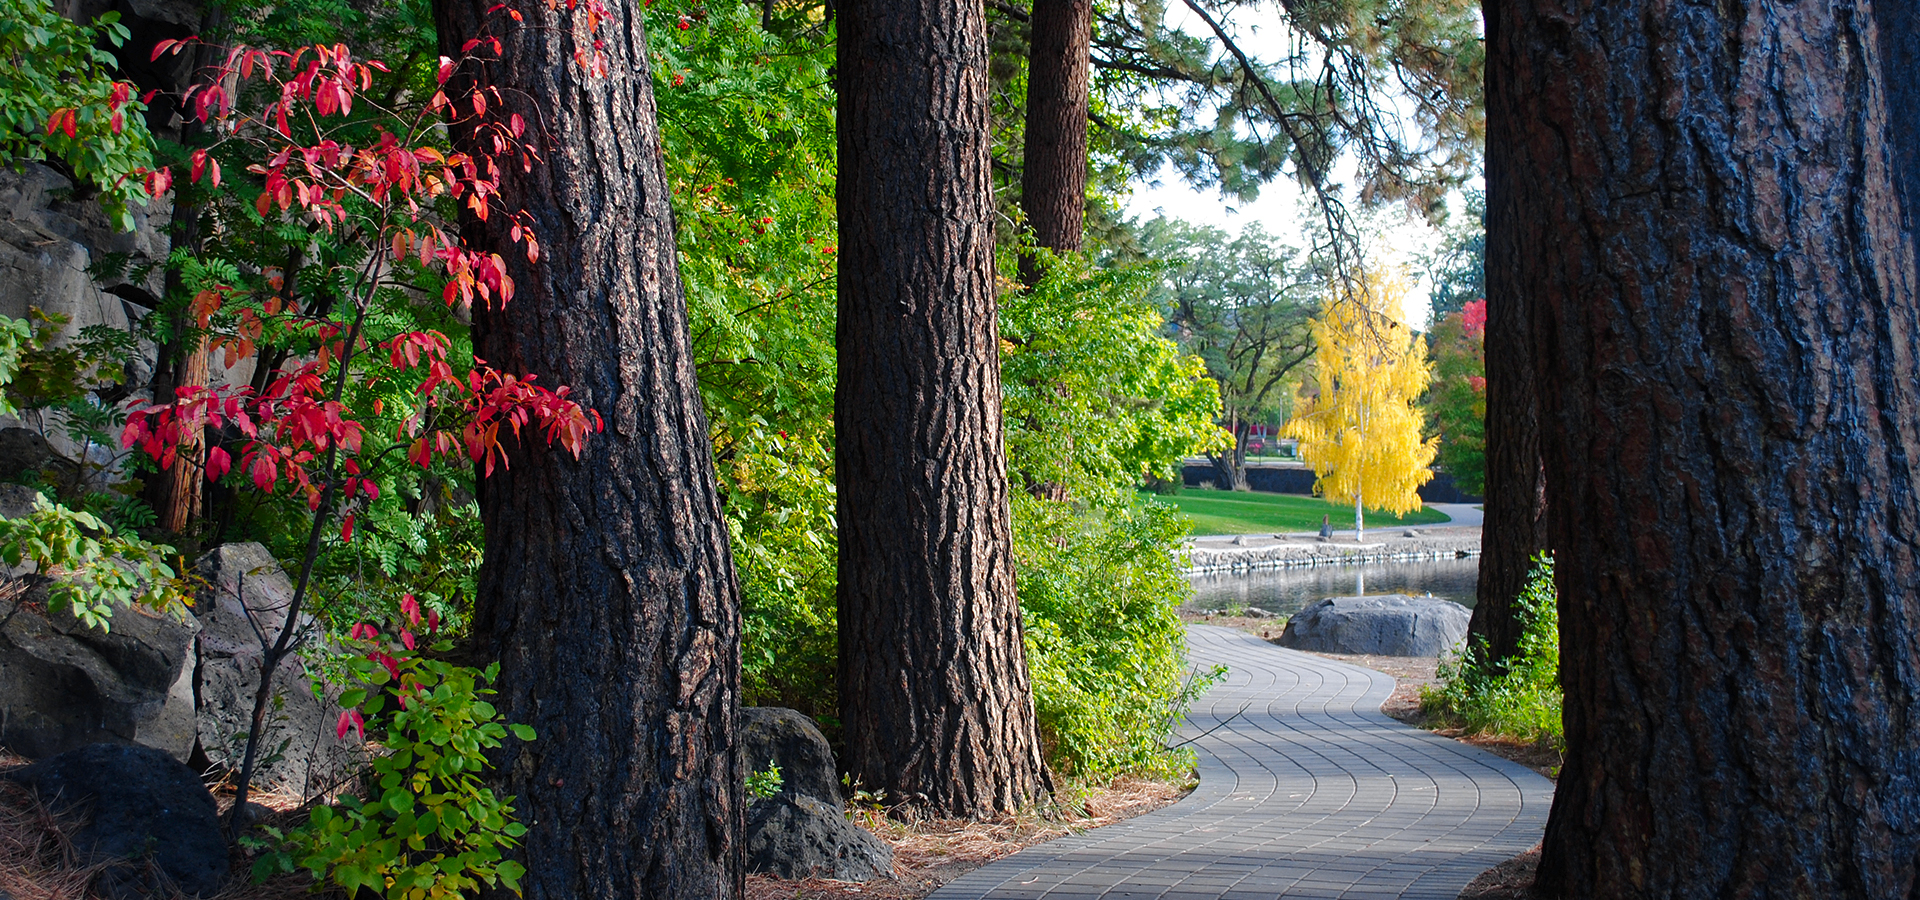 The paved path and colorful trees at Pioneer Park.